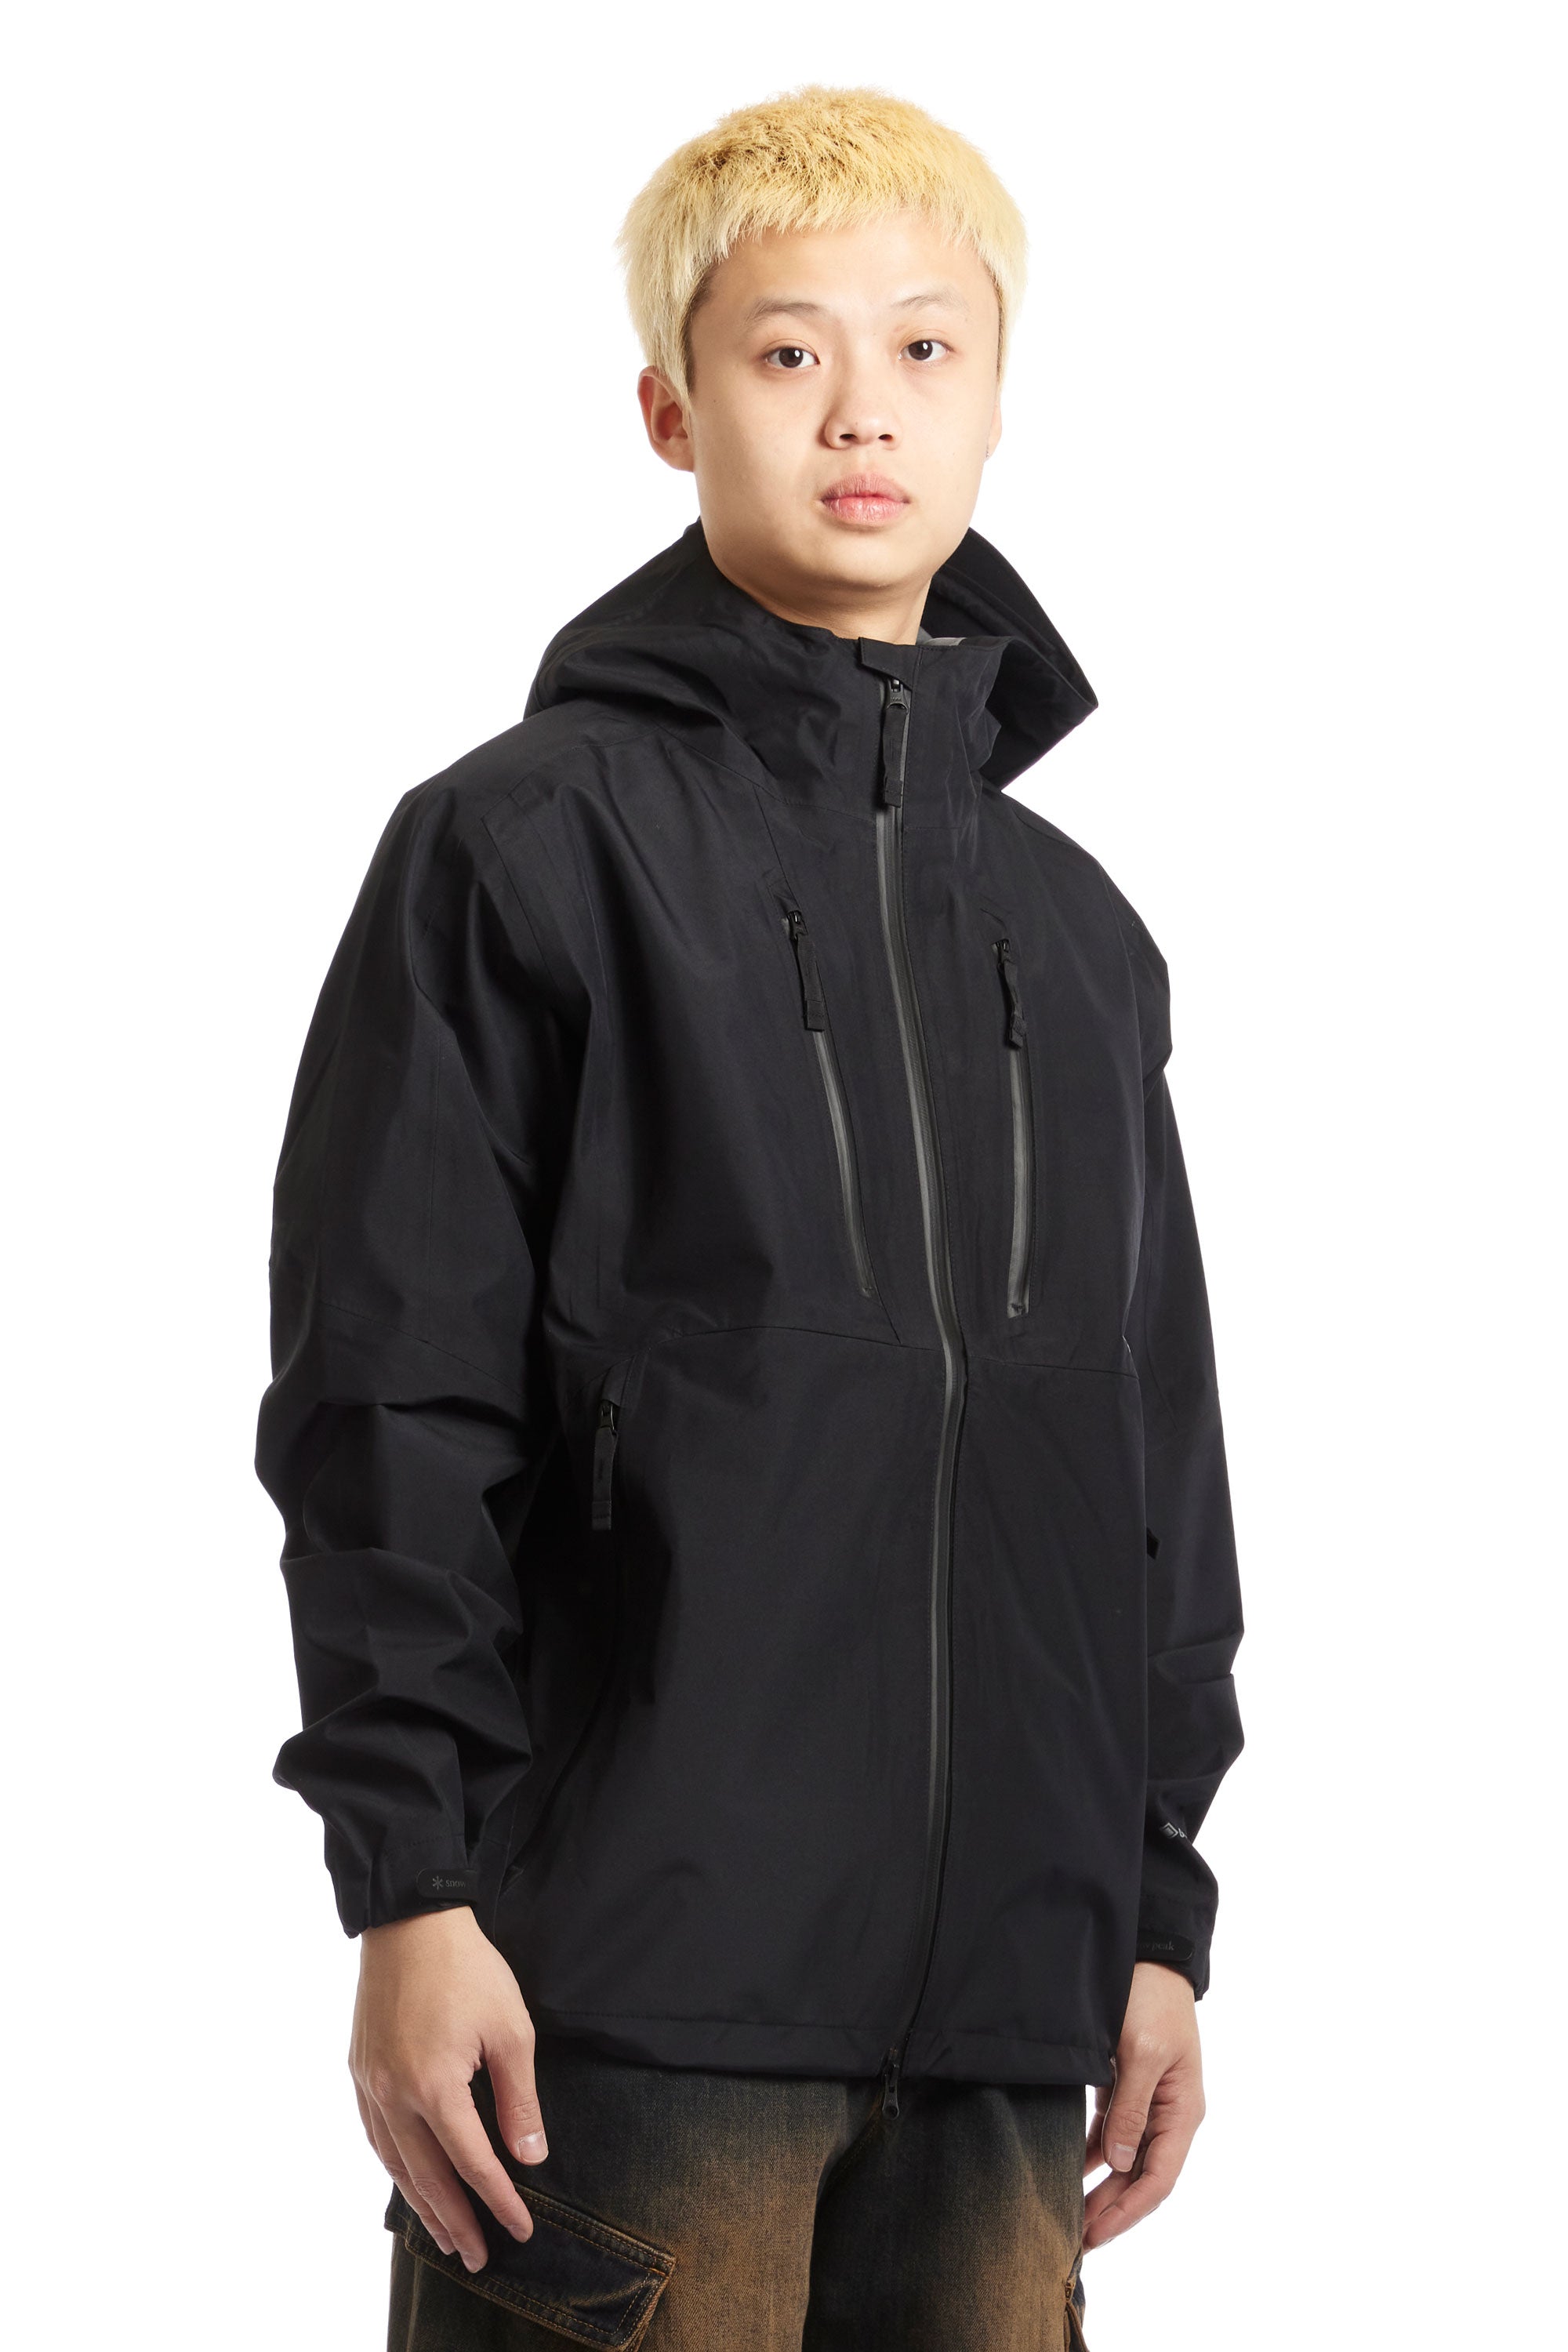 The SNOW PEAK - GORE-TEX RAIN JACKET  available online with global shipping, and in PAM Stores Melbourne and Sydney.